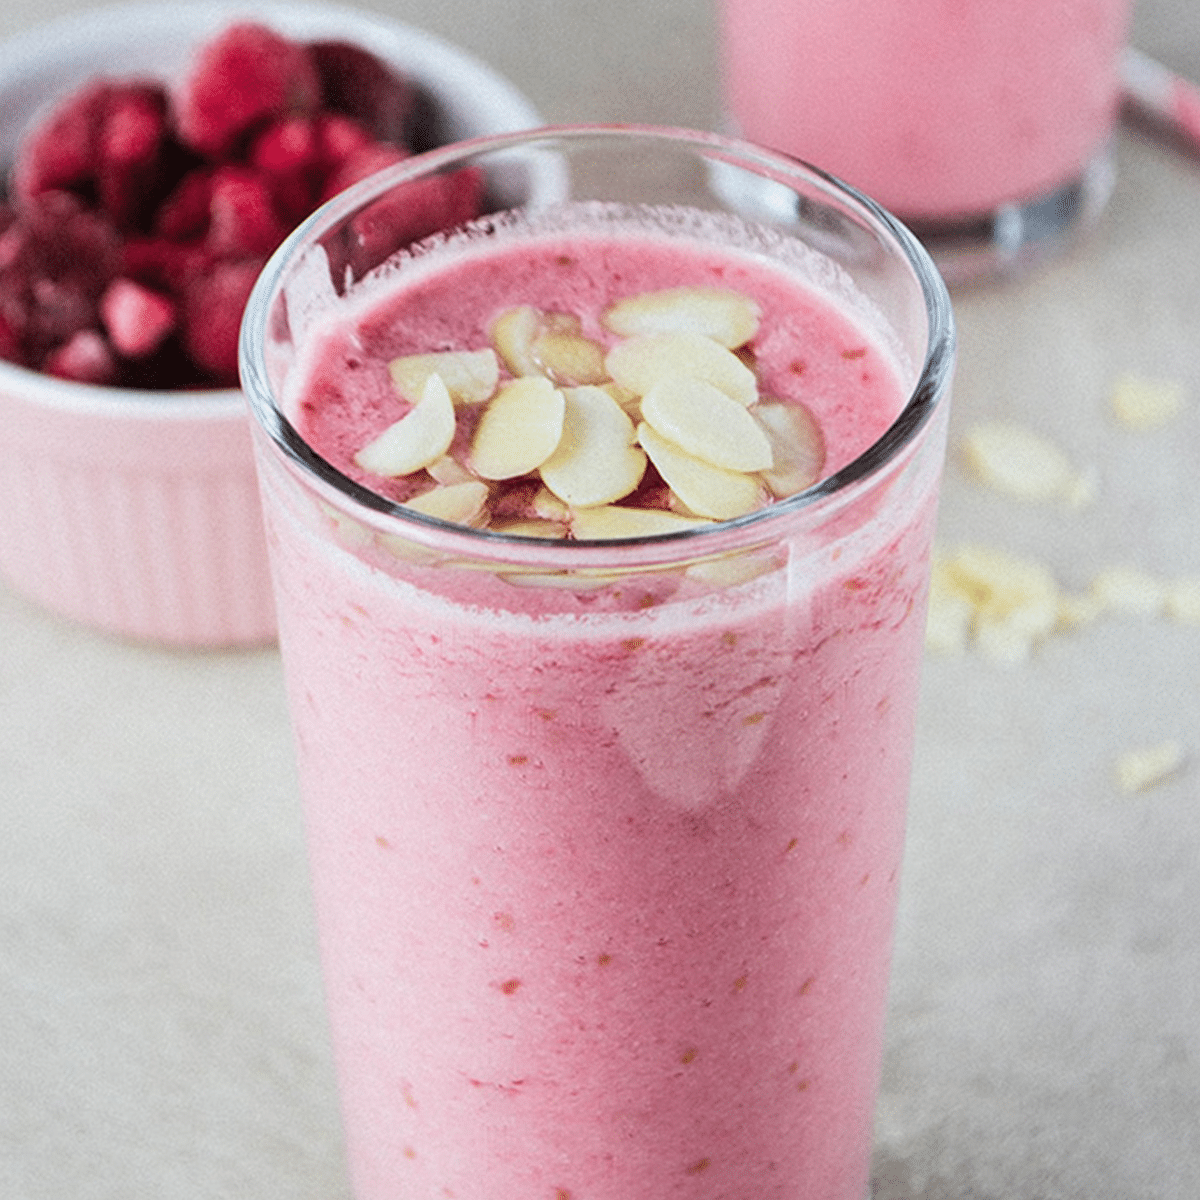 Vegan Bakewell Smoothie with raspberries and almonds (no banana)